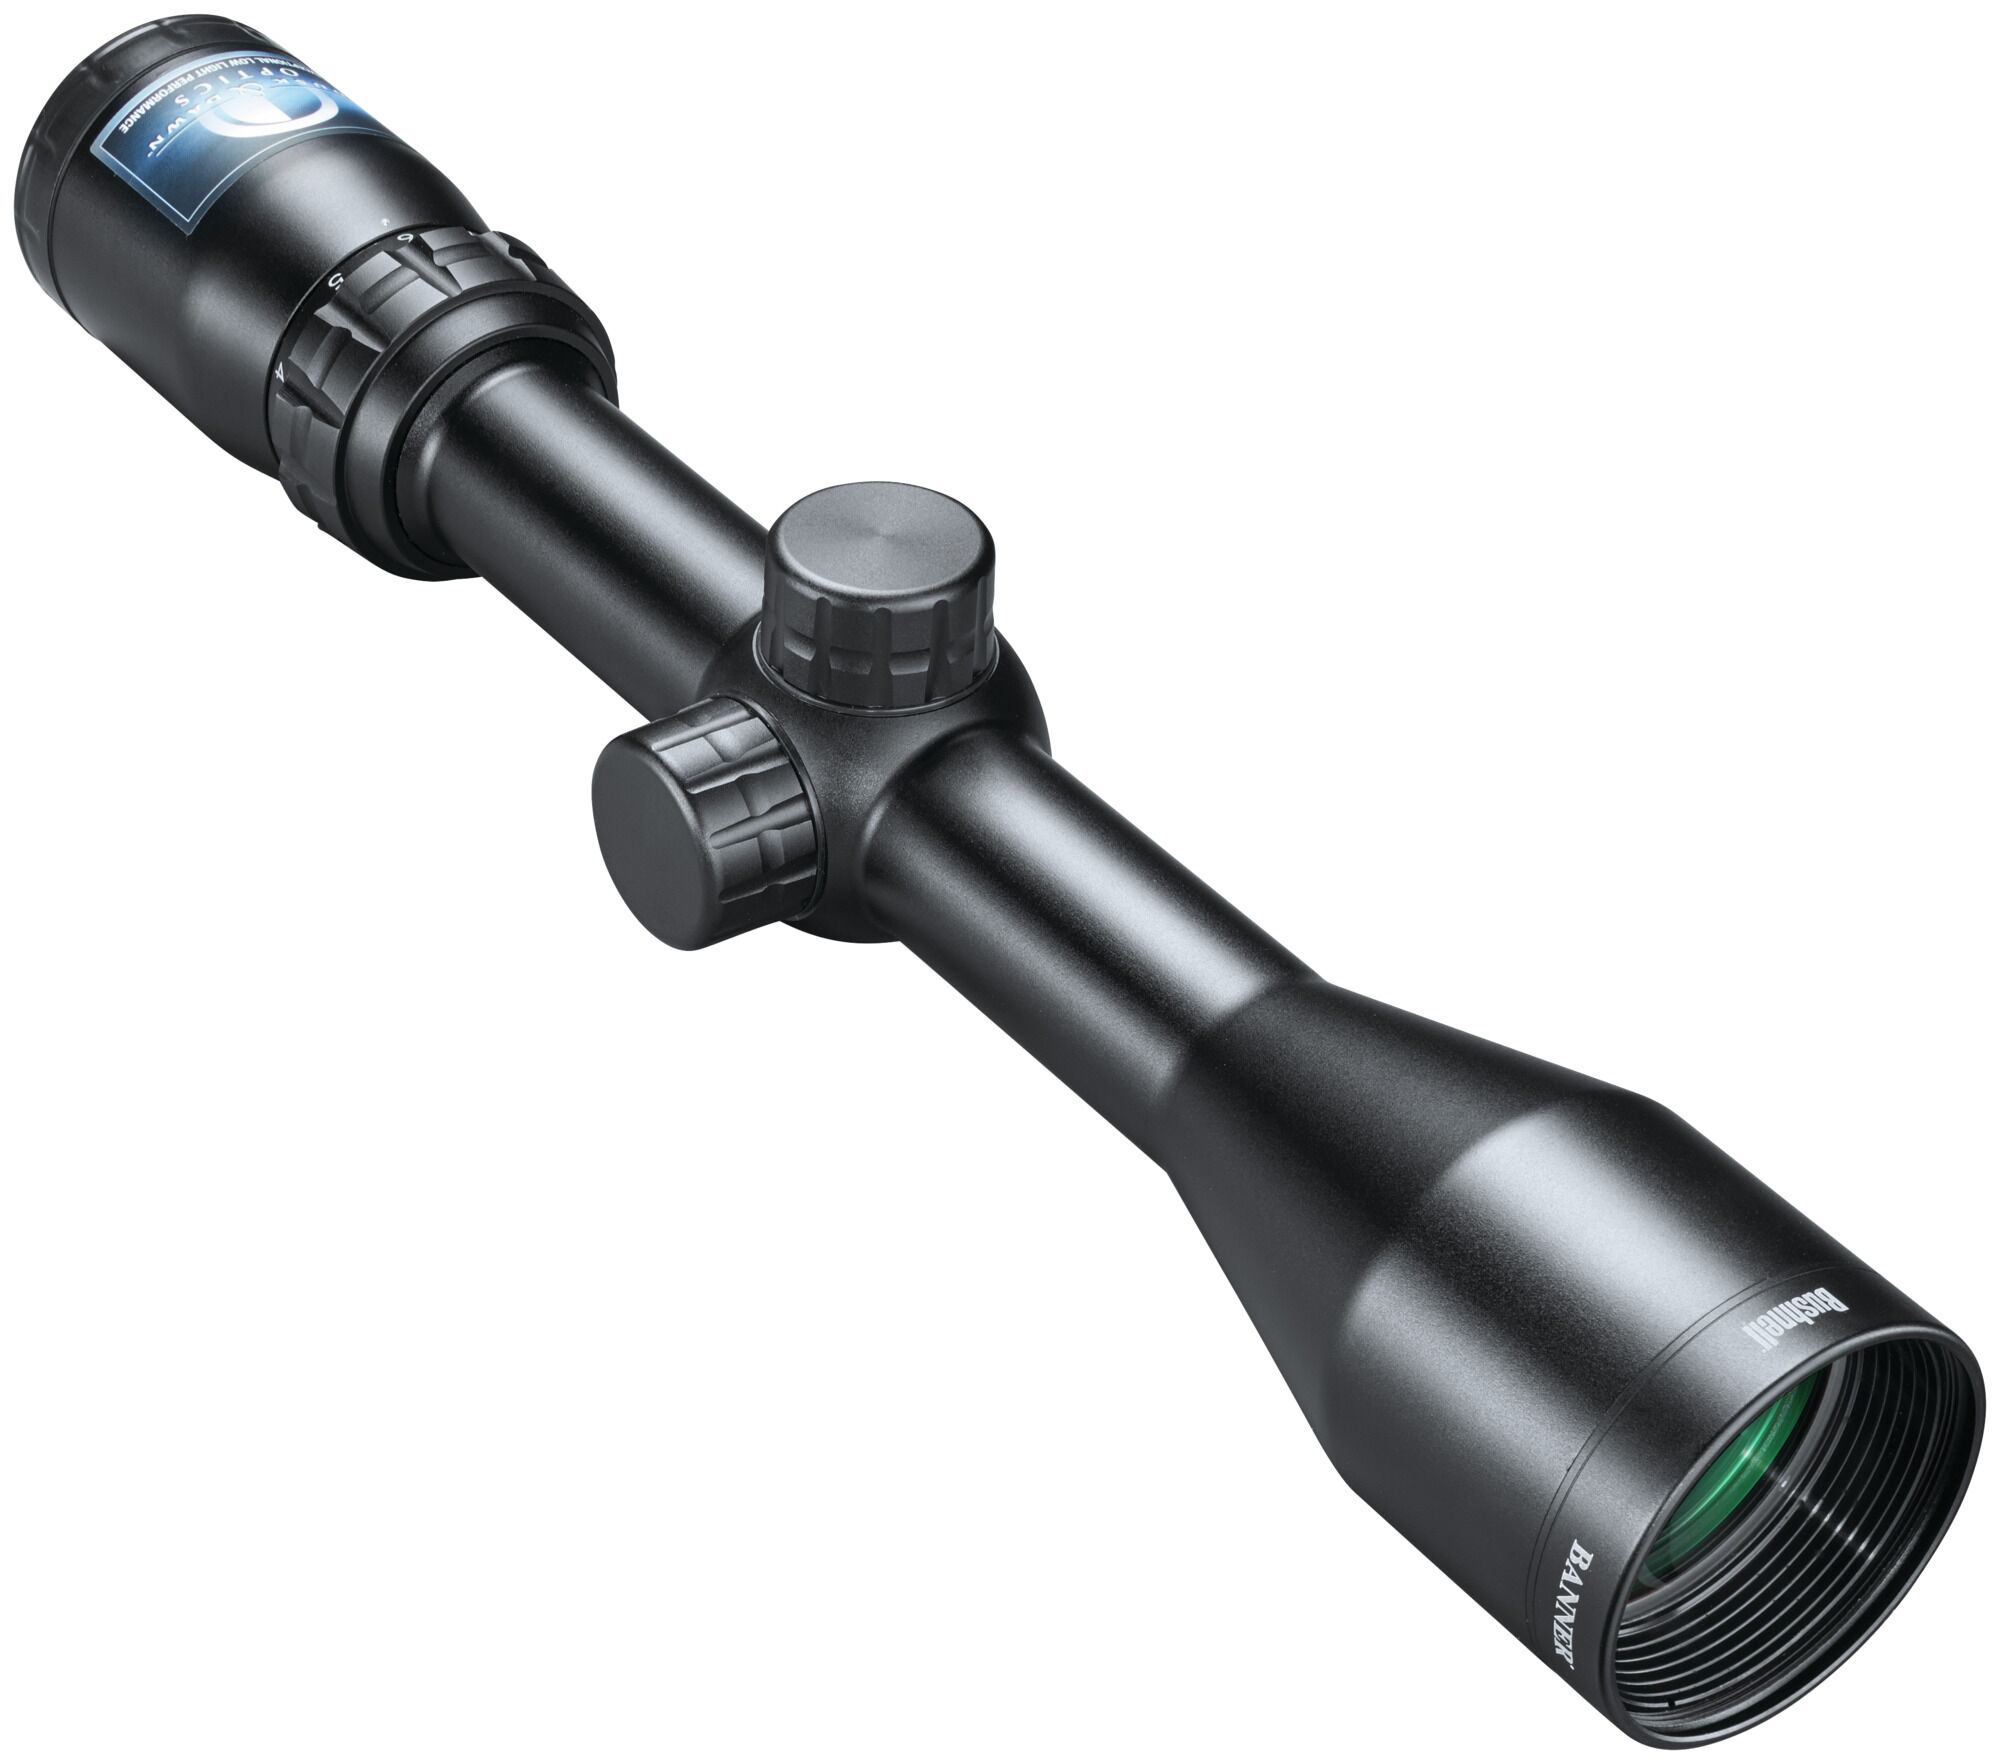 Shop All Riflescopes. Shop Today For All of Your Outdoor Needs!